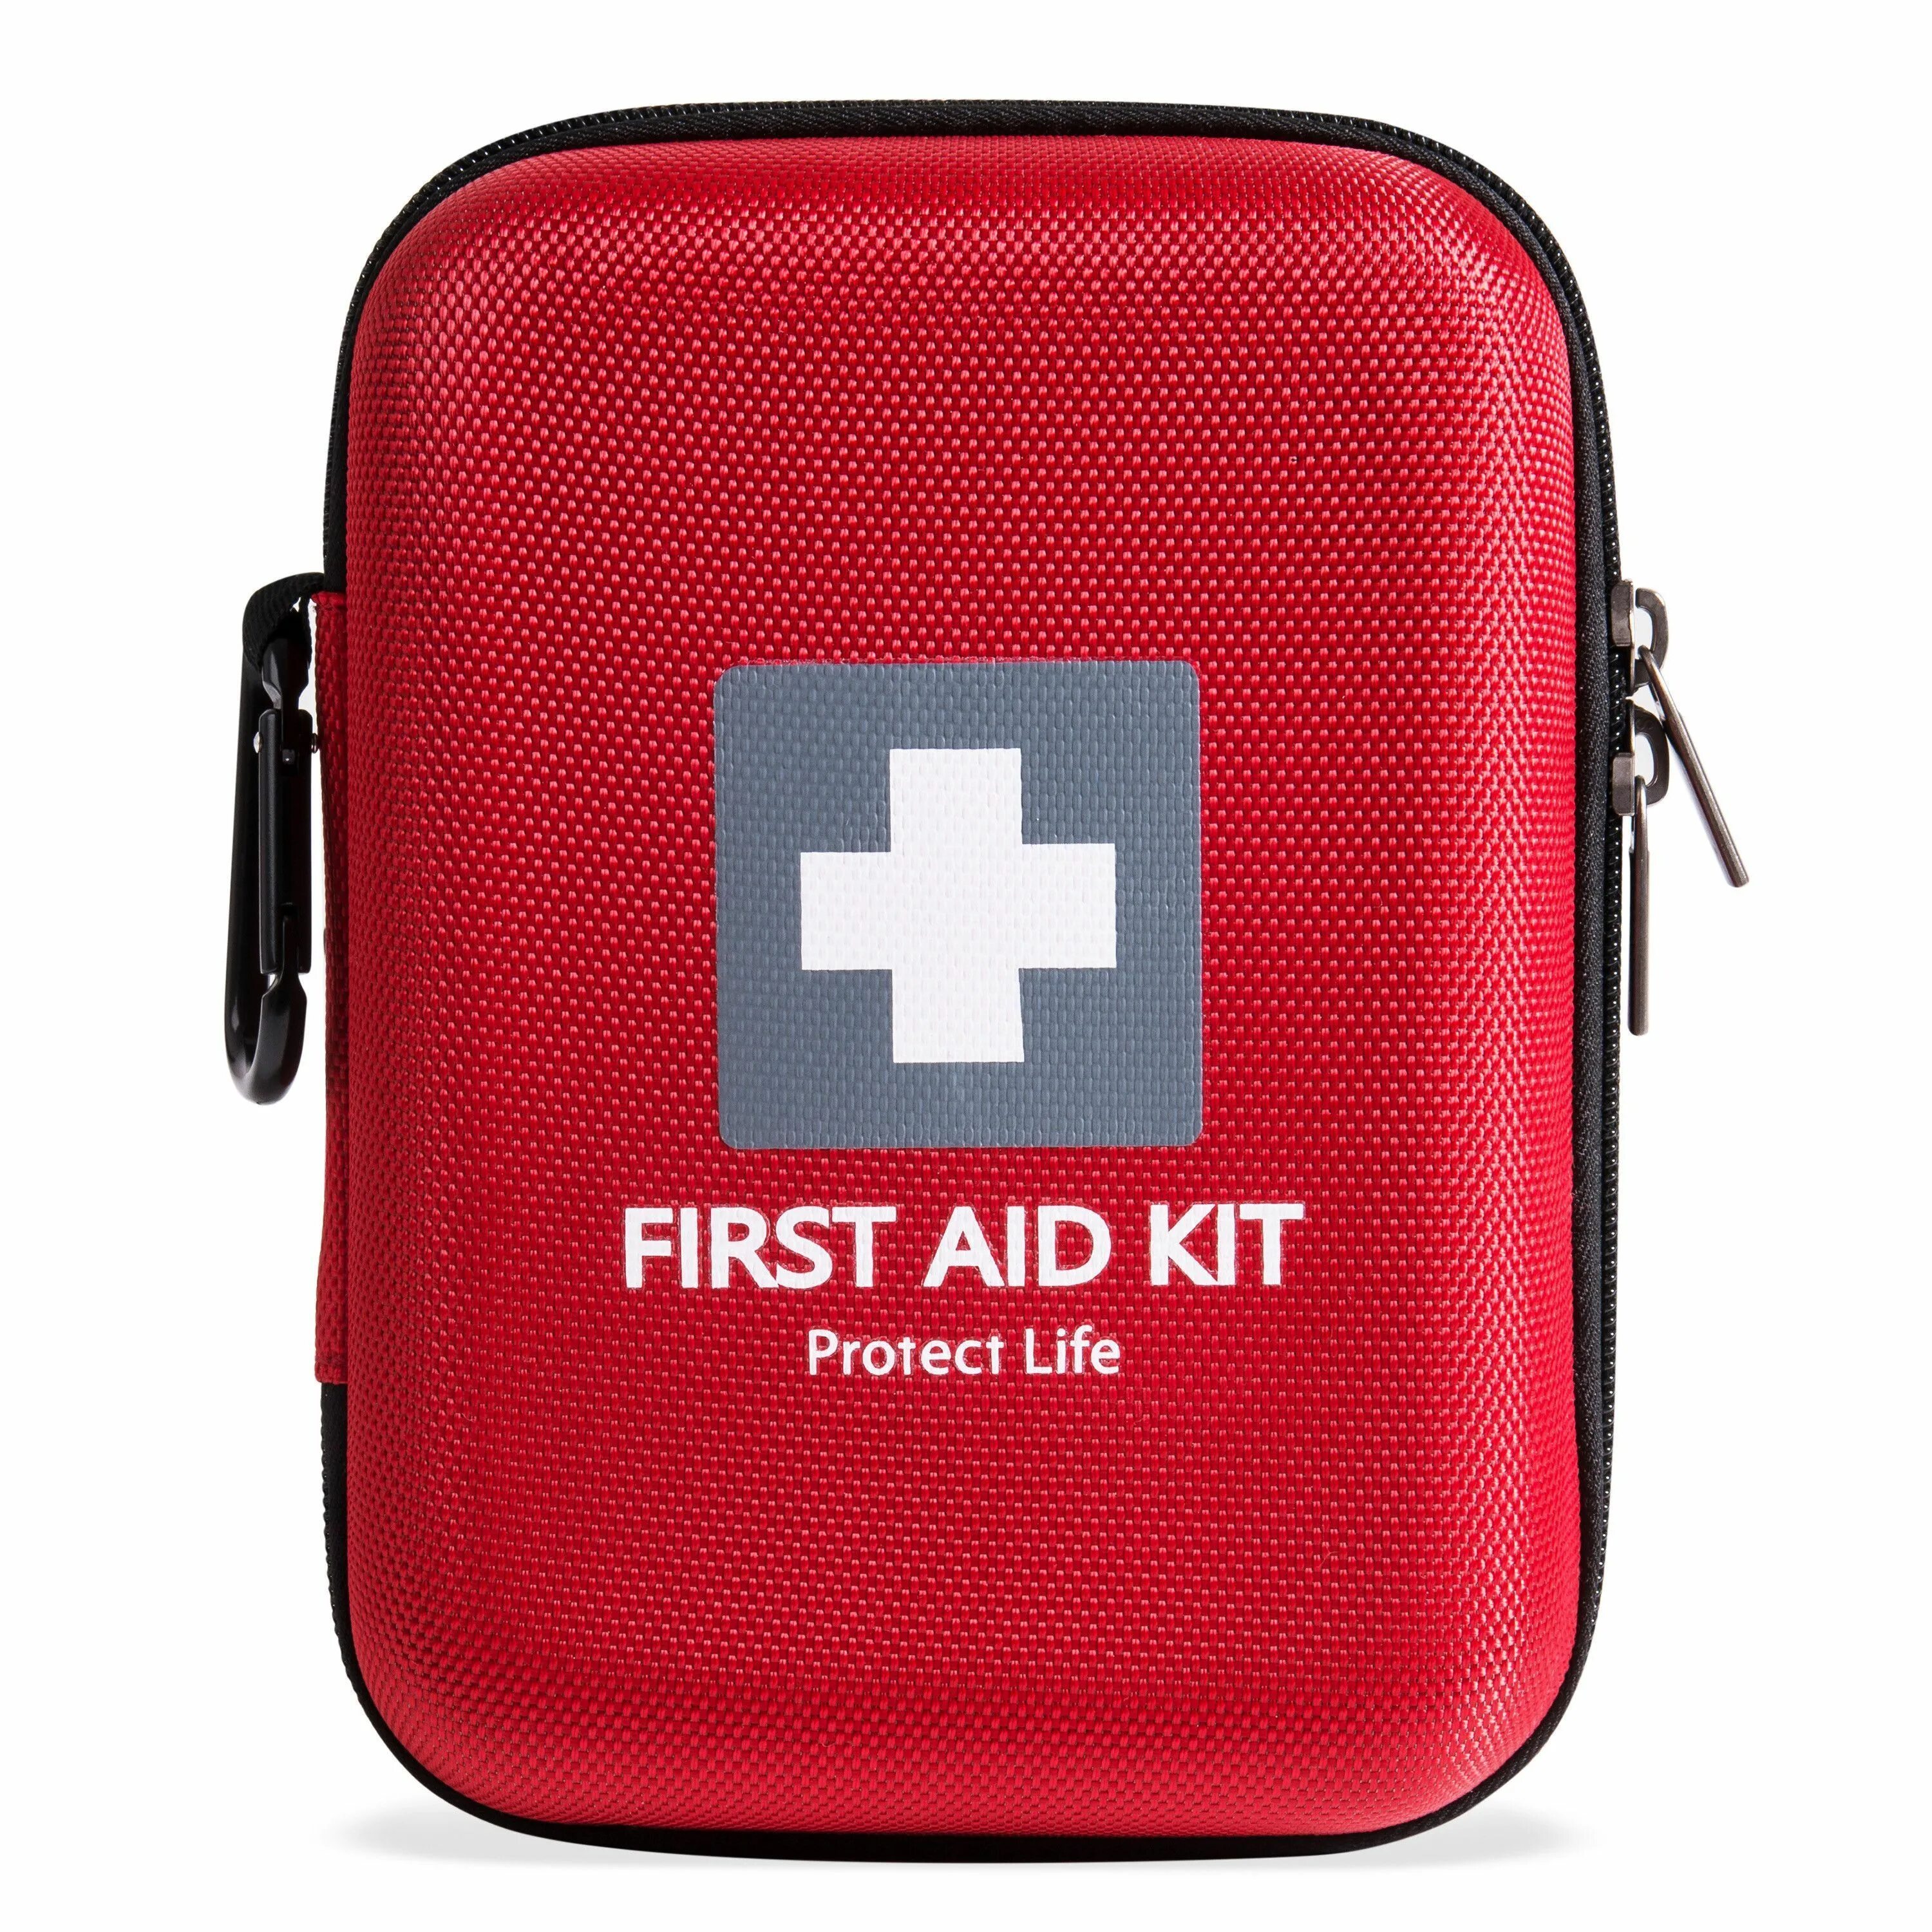 Is to protect life. First Aid Kit. Аптечка first Aid. Кейс для аптечки. Аптечка тканевая.